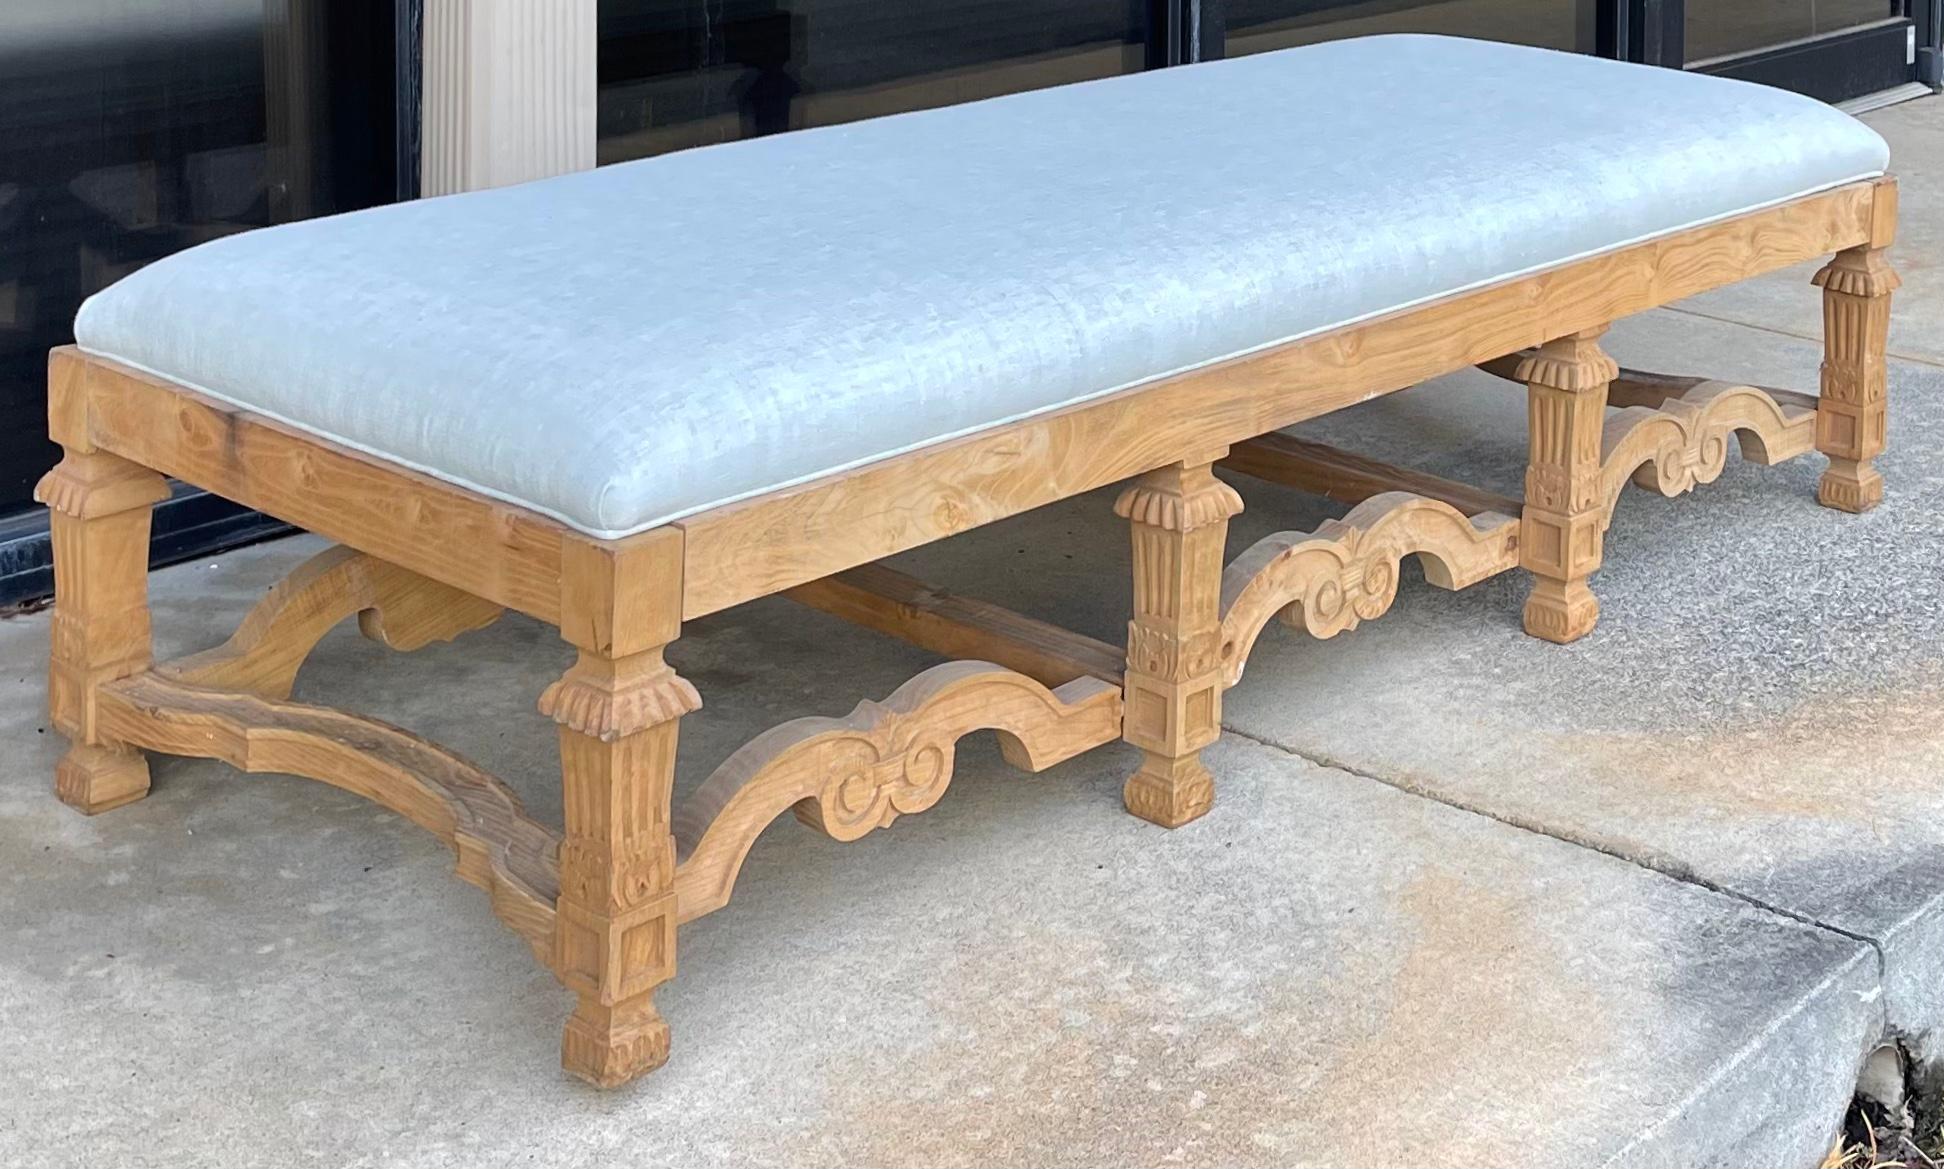 These are wonderful! This is a French style stripped oak ottoman newly upholstered in a light blue / seafoam color linen. 